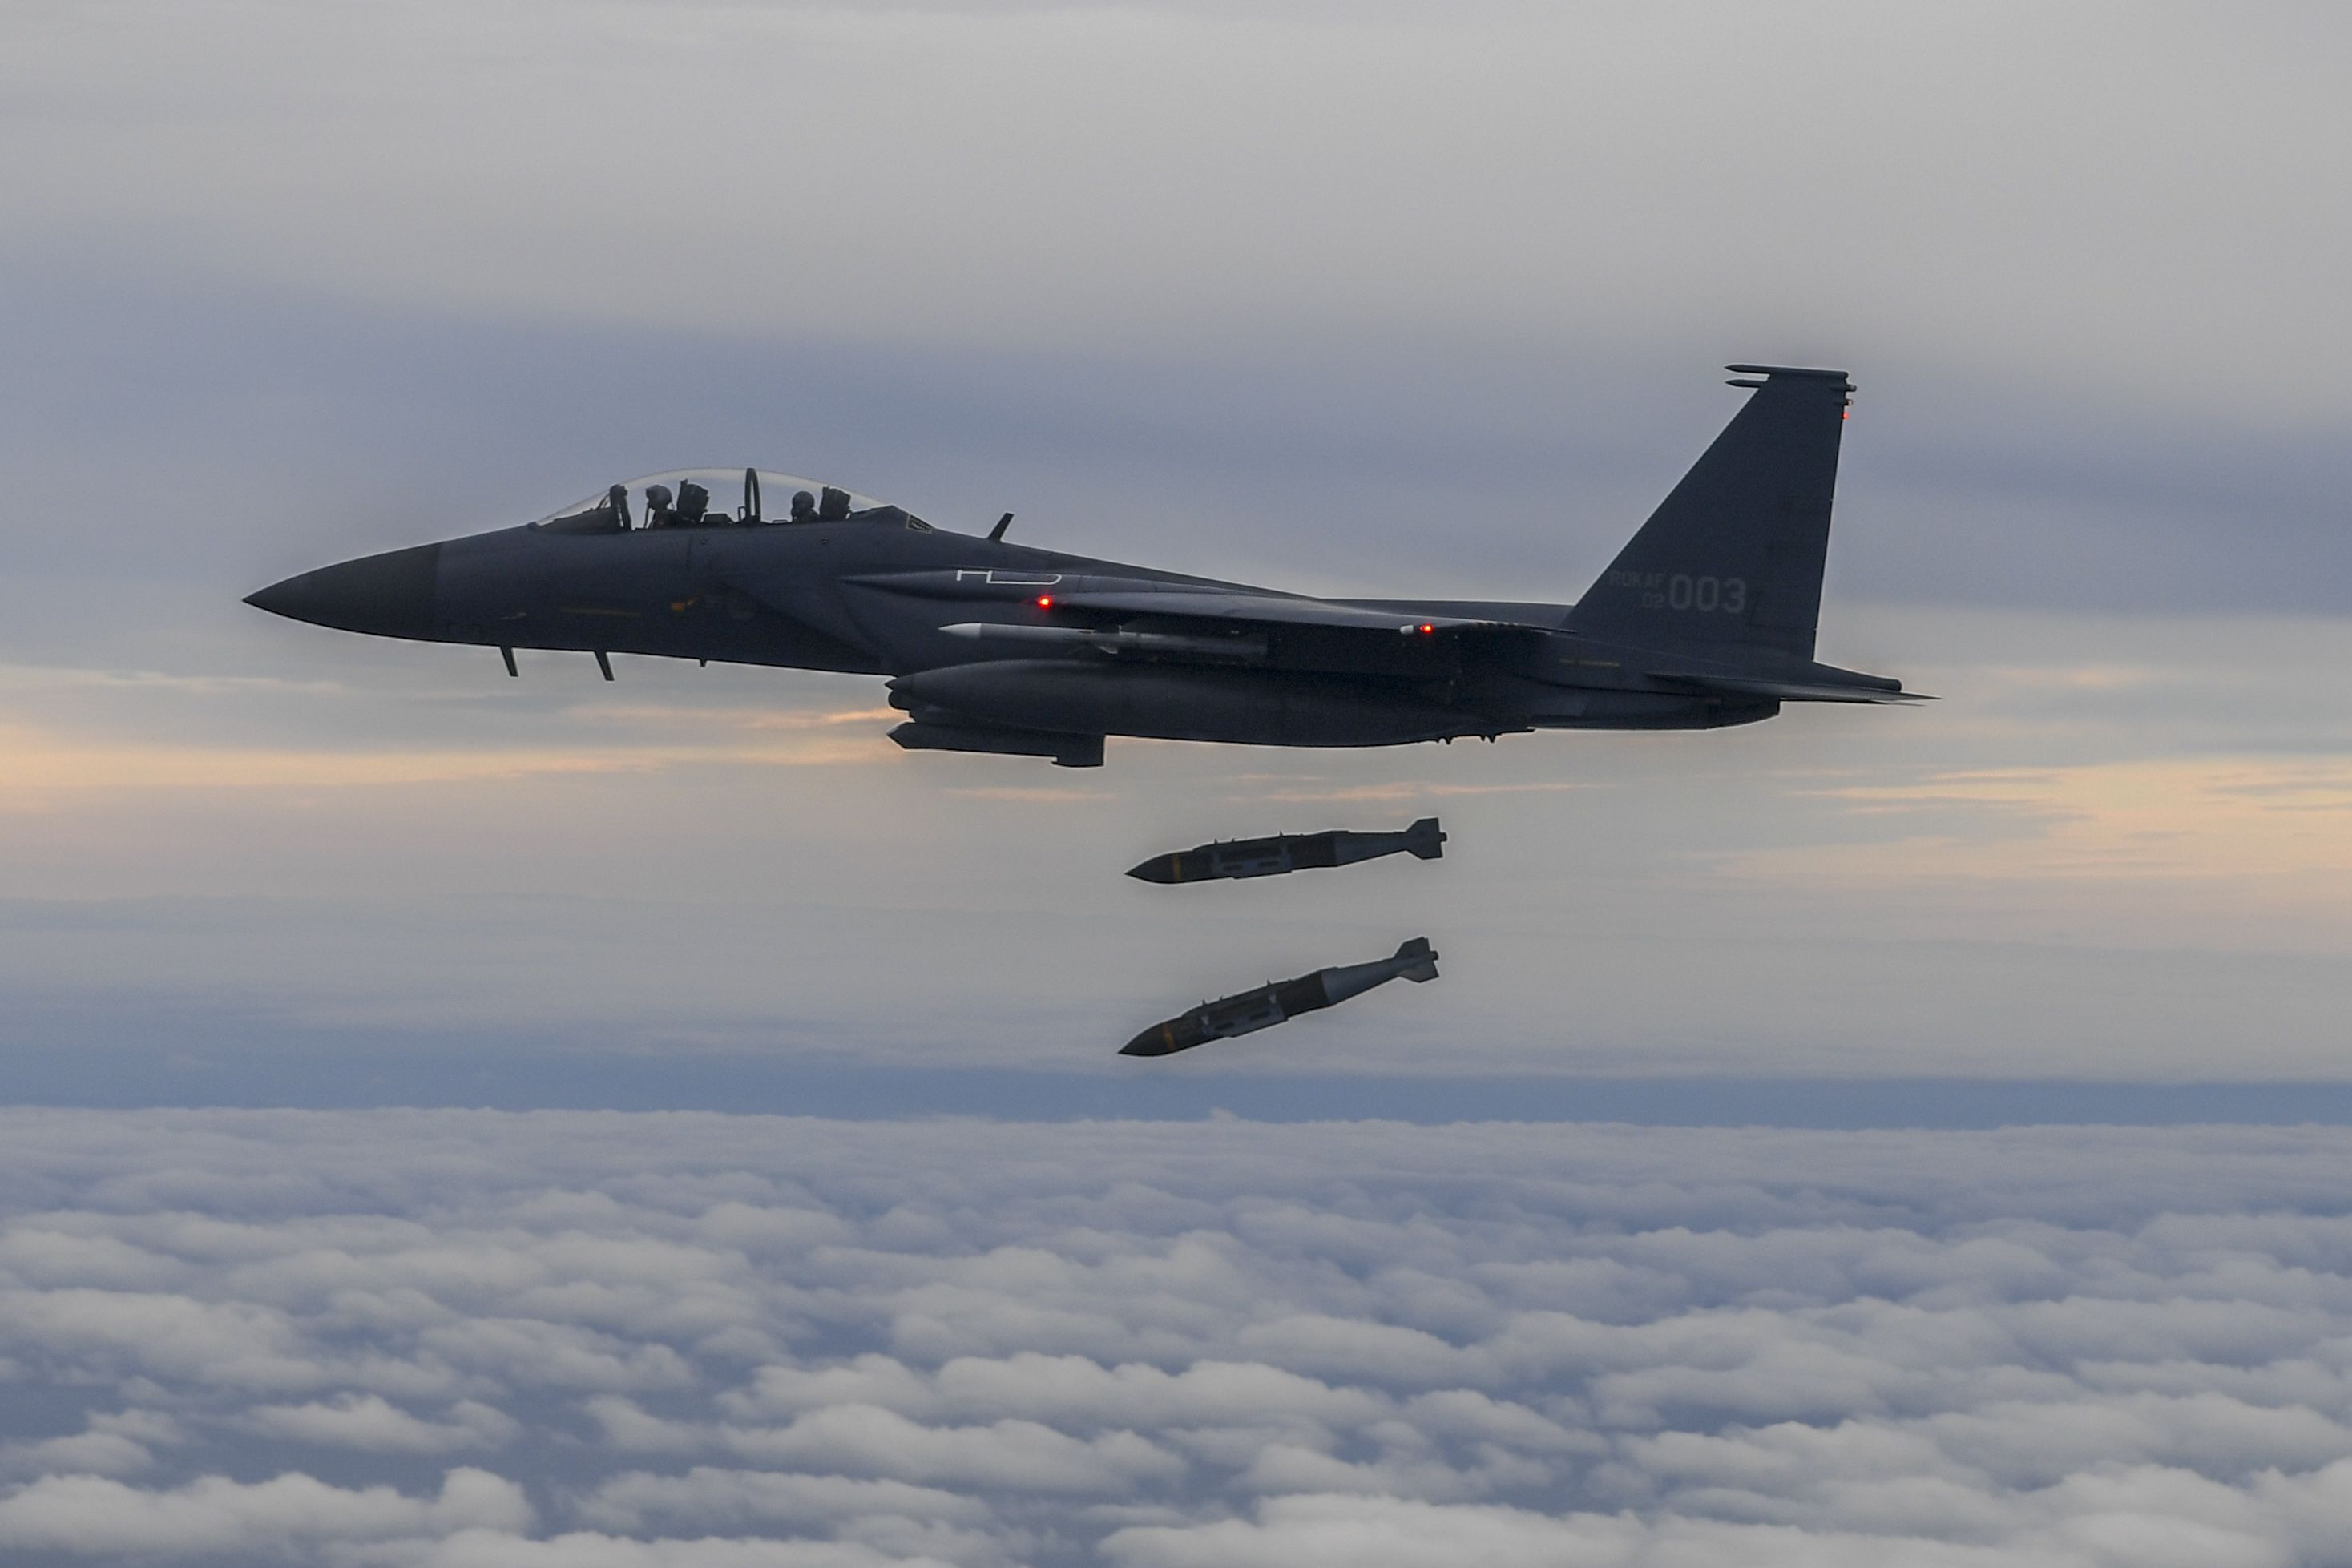 A South Korean F-15K fighter fires two bombs into an island target in response to North Korea's intermediate-range ballistic missile (IRBM) launch earlier in the day on Oct. 4.